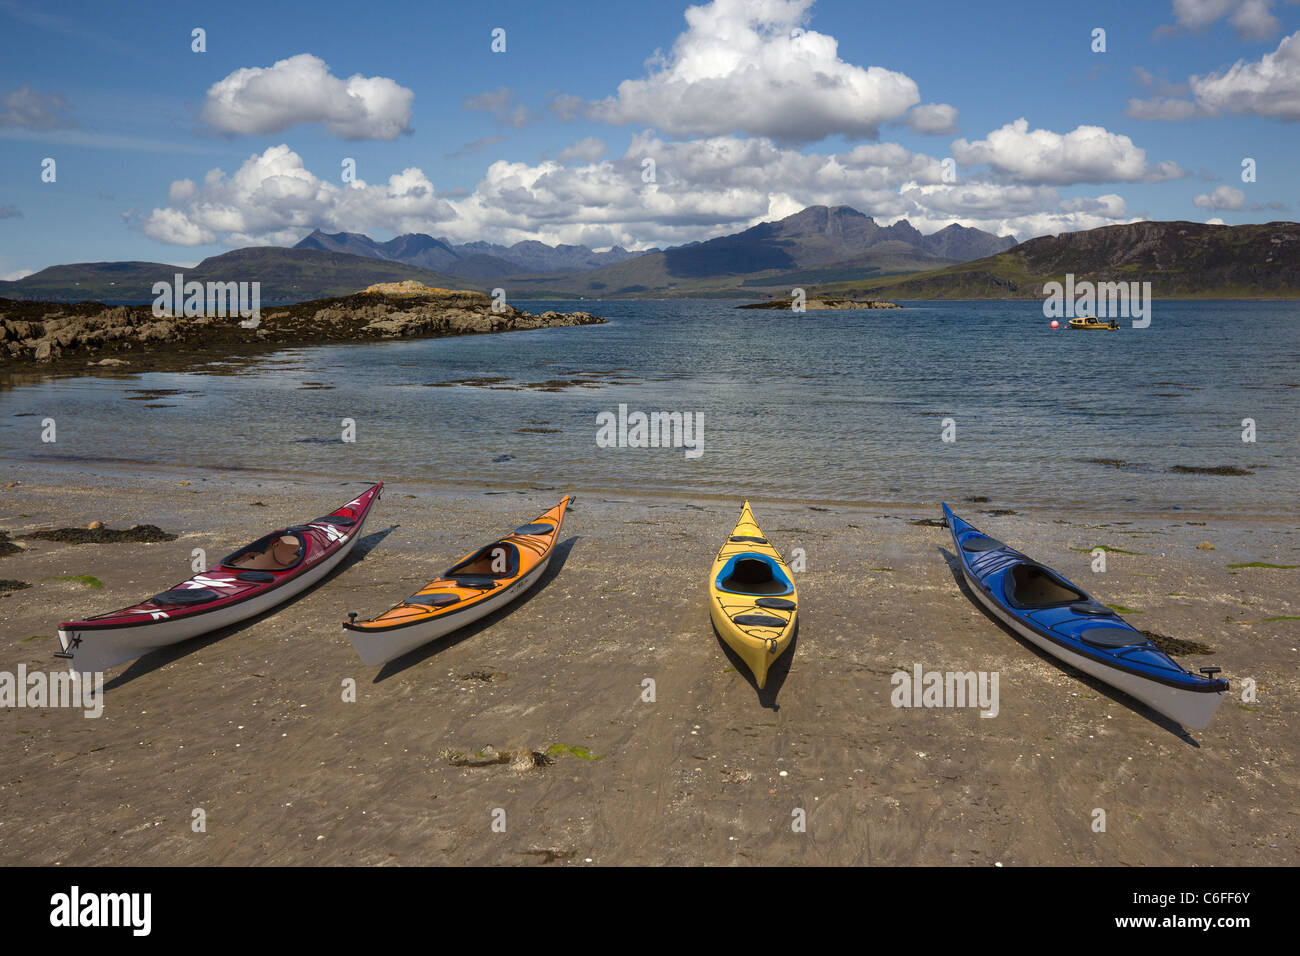 Four sea Kayaks on sandy beach with Loch Eishort and the Cuillin Mountains in the distance, Isle of Skye, Scotland, UK Stock Photo